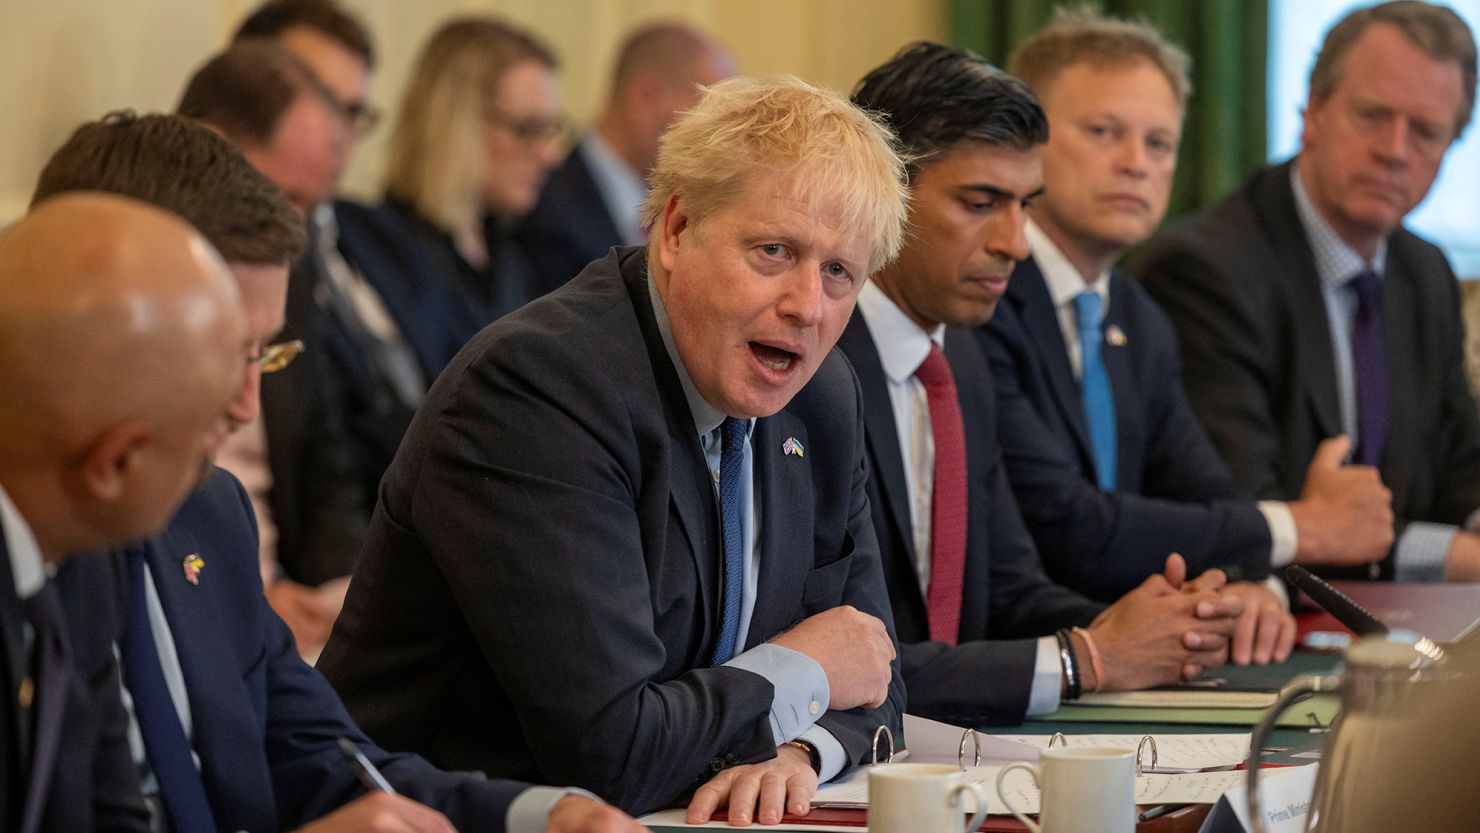 Johnson expects to chair a Cabinet meeting on Tuesday, his spokesperson said.